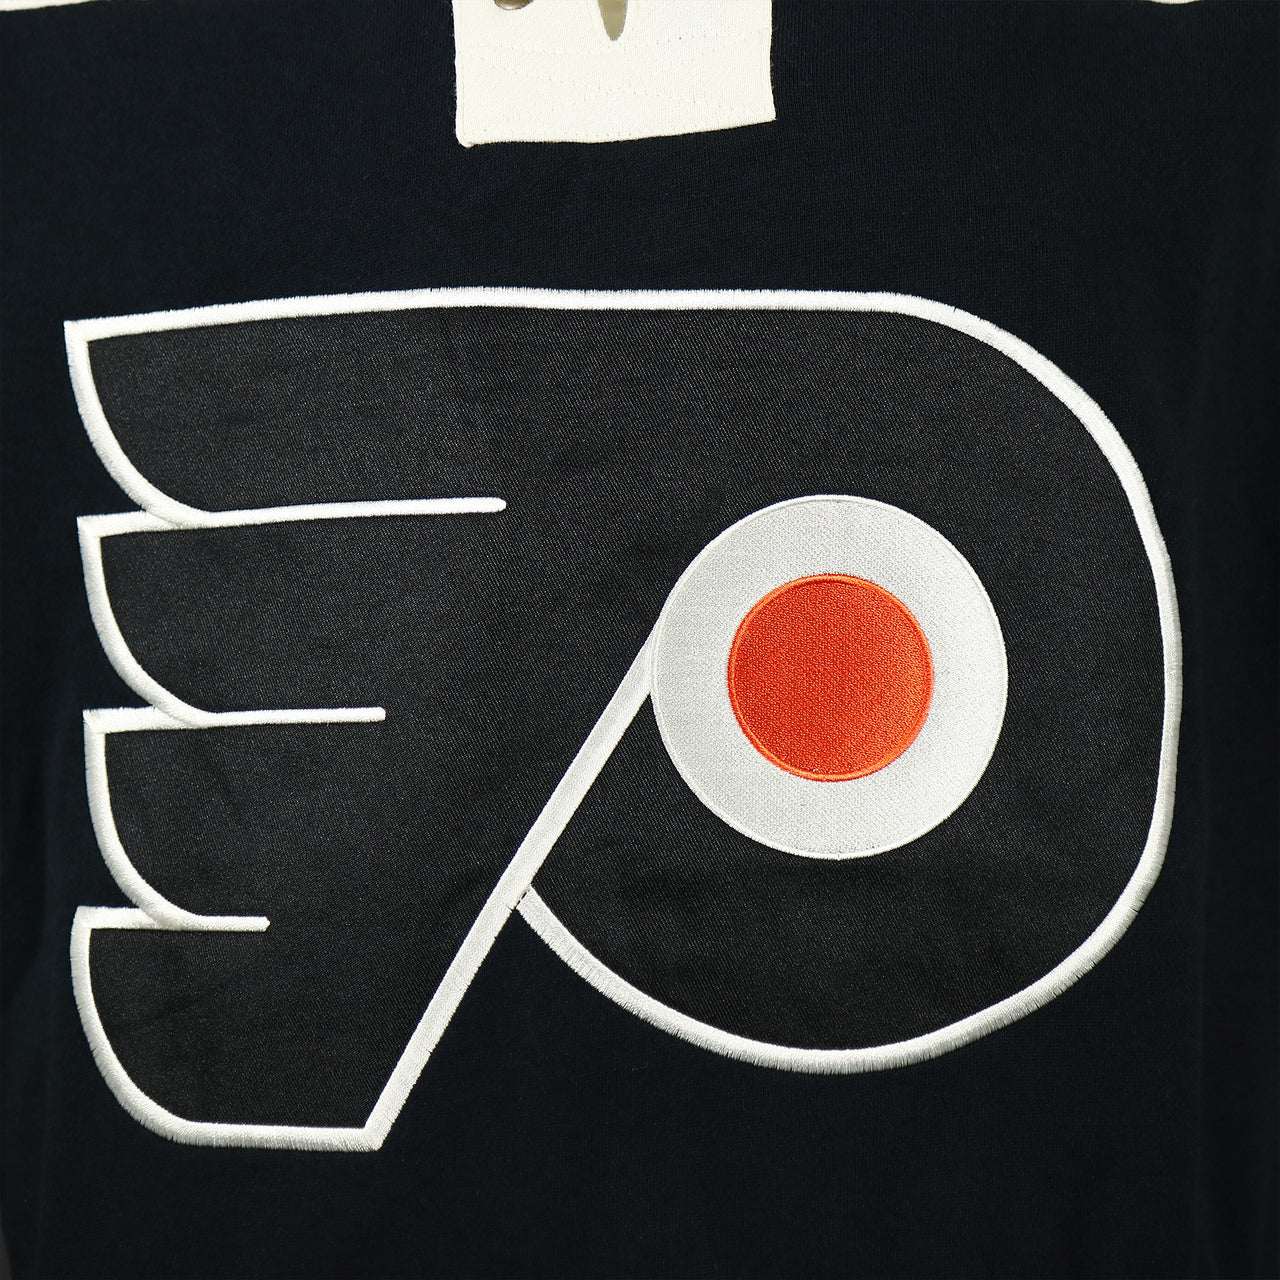 Close up of the Flyers logo on the front of the Philadelphia Flyers Premium Applique Black/Orange/Cream Lacer Hoodie